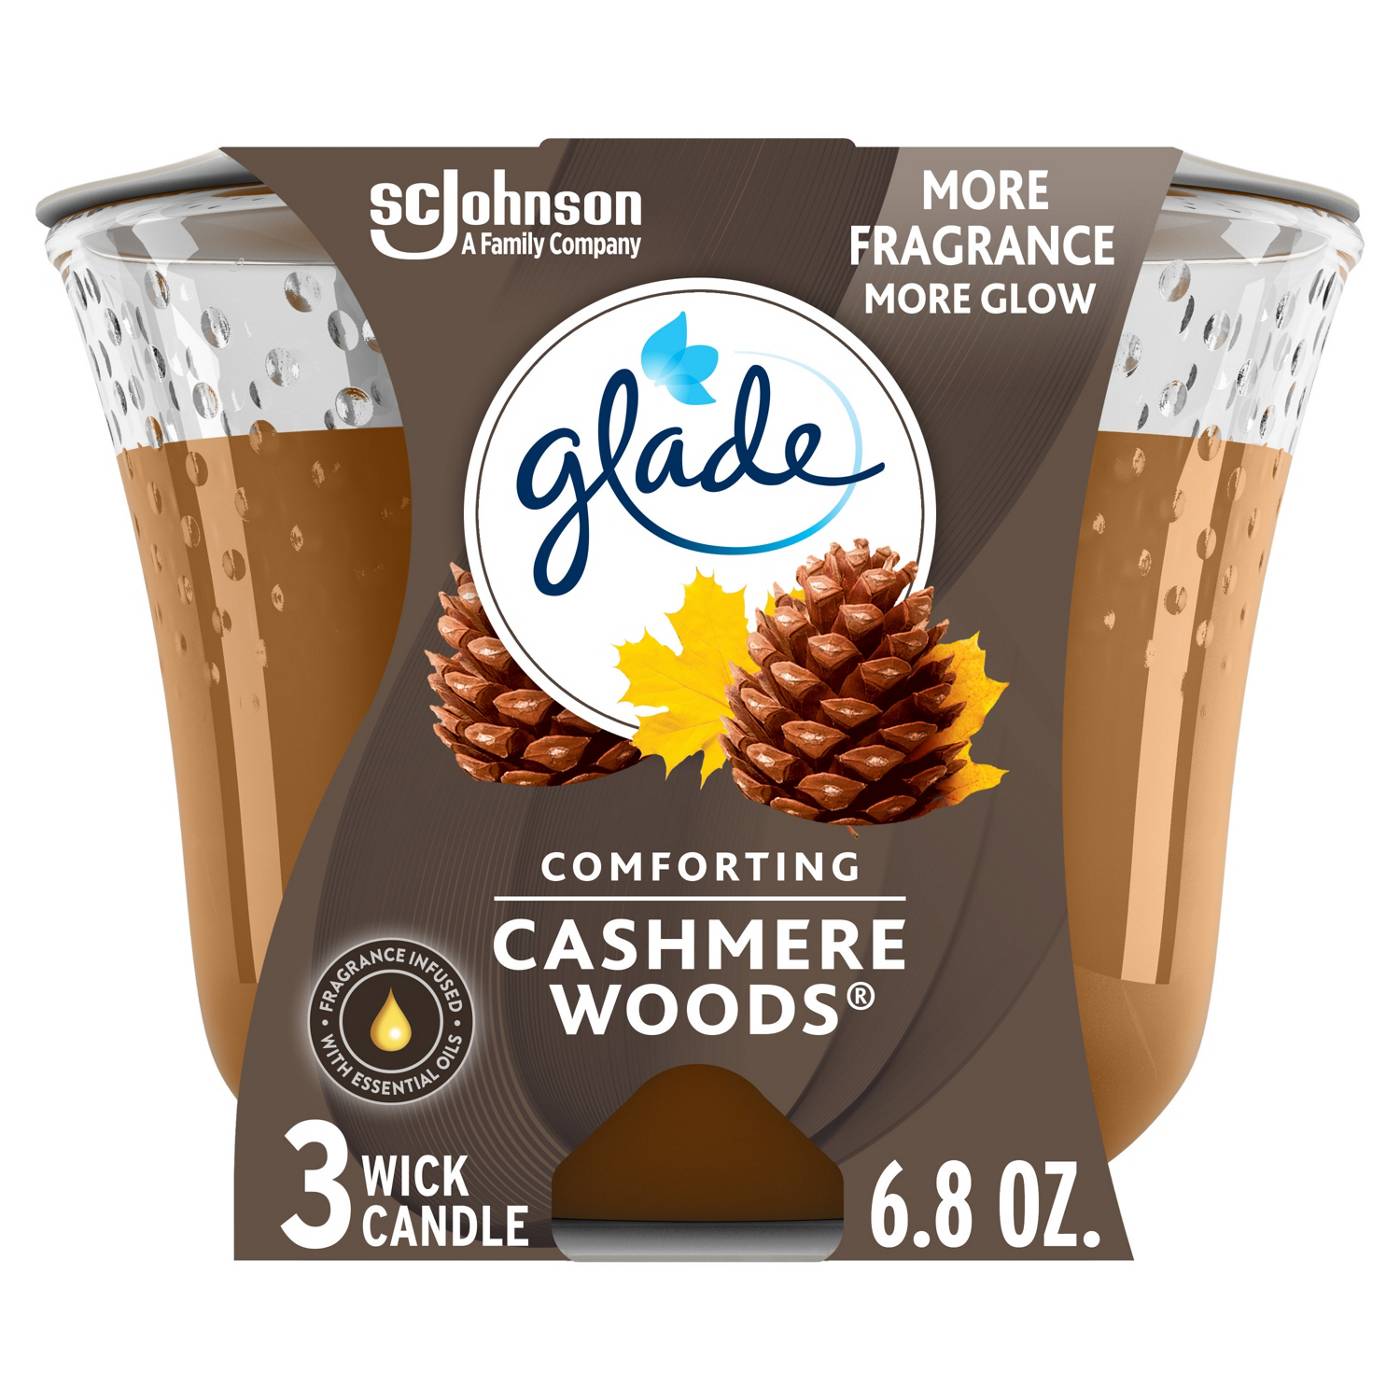 Glade Cashmere Woods 3 Wick Candle; image 1 of 2